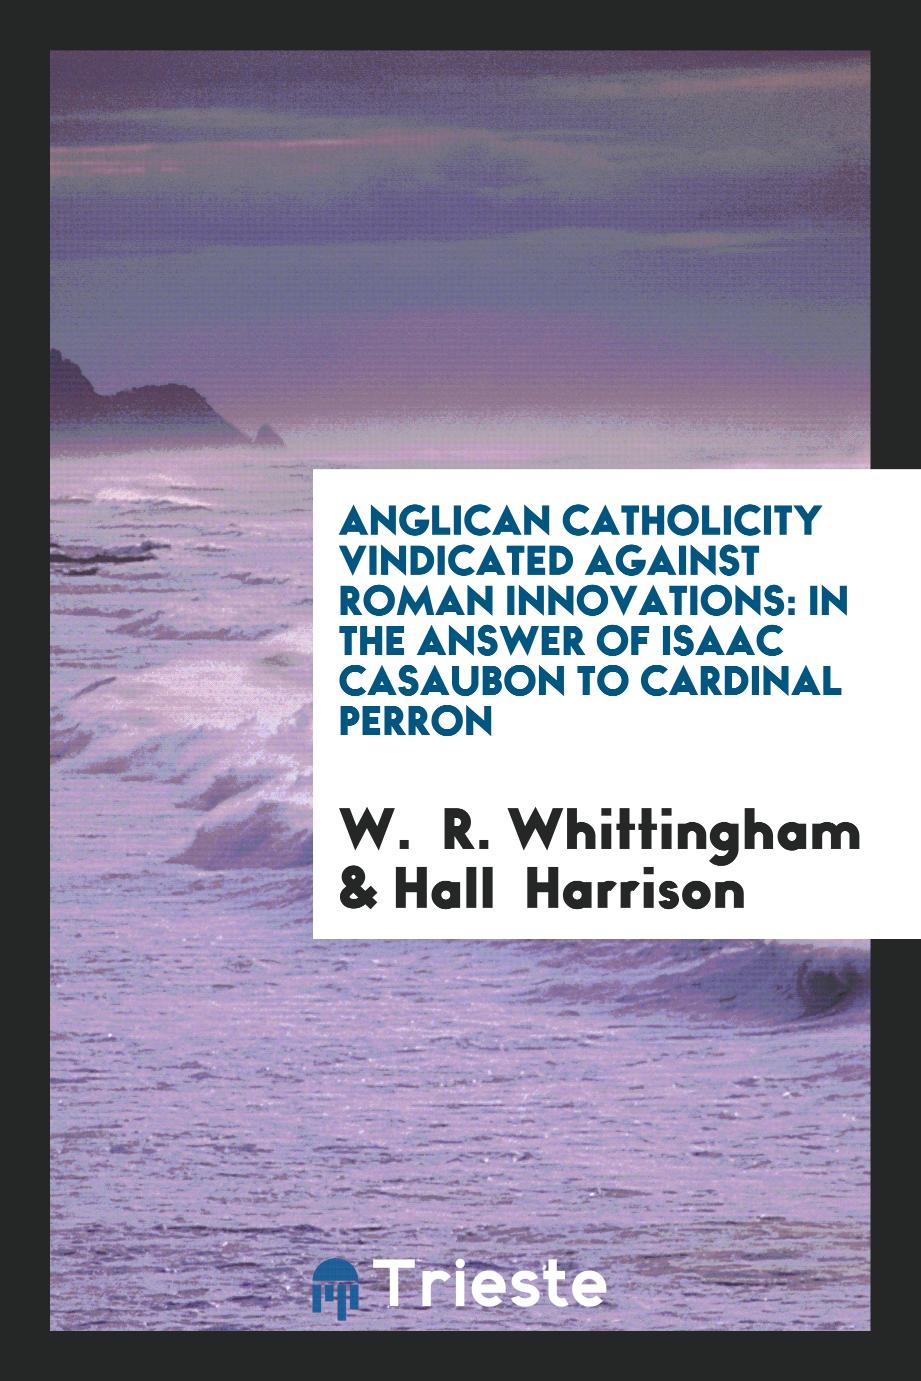 Anglican Catholicity Vindicated Against Roman Innovations: In The Answer of Isaac Casaubon to Cardinal Perron